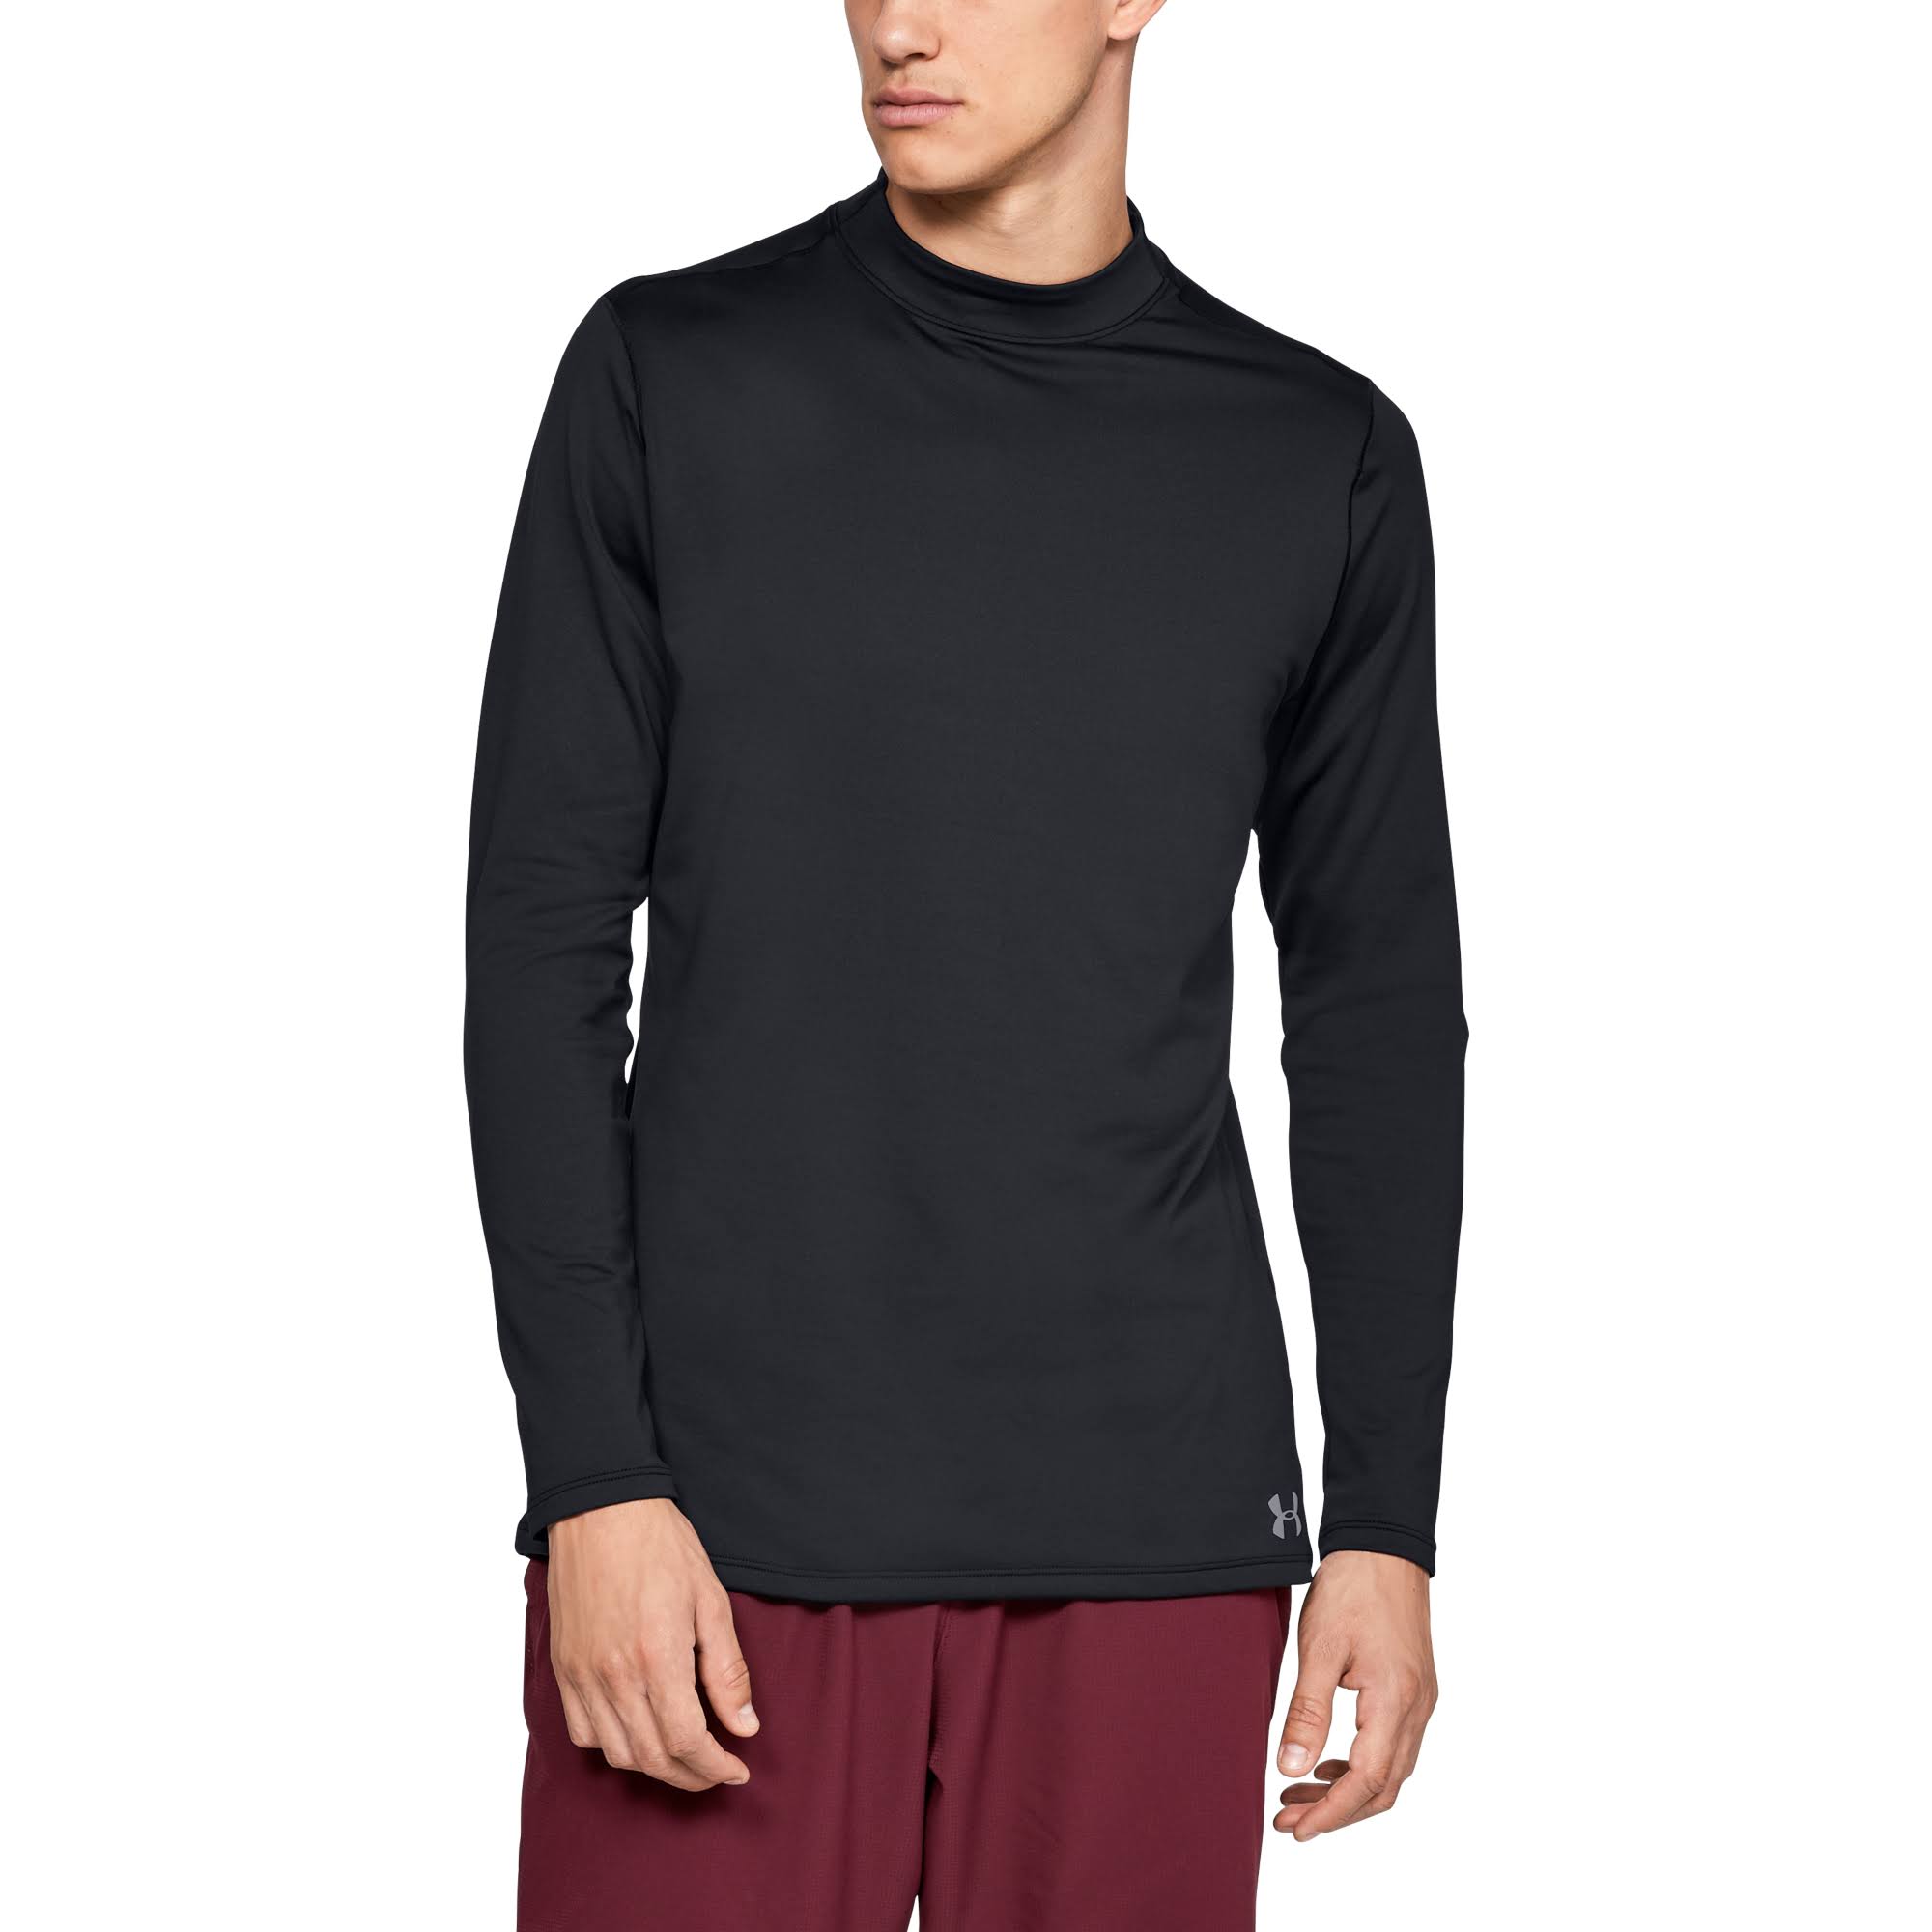 Under Armour ColdGear Armour Fitted Mock Shirt - Black, Small